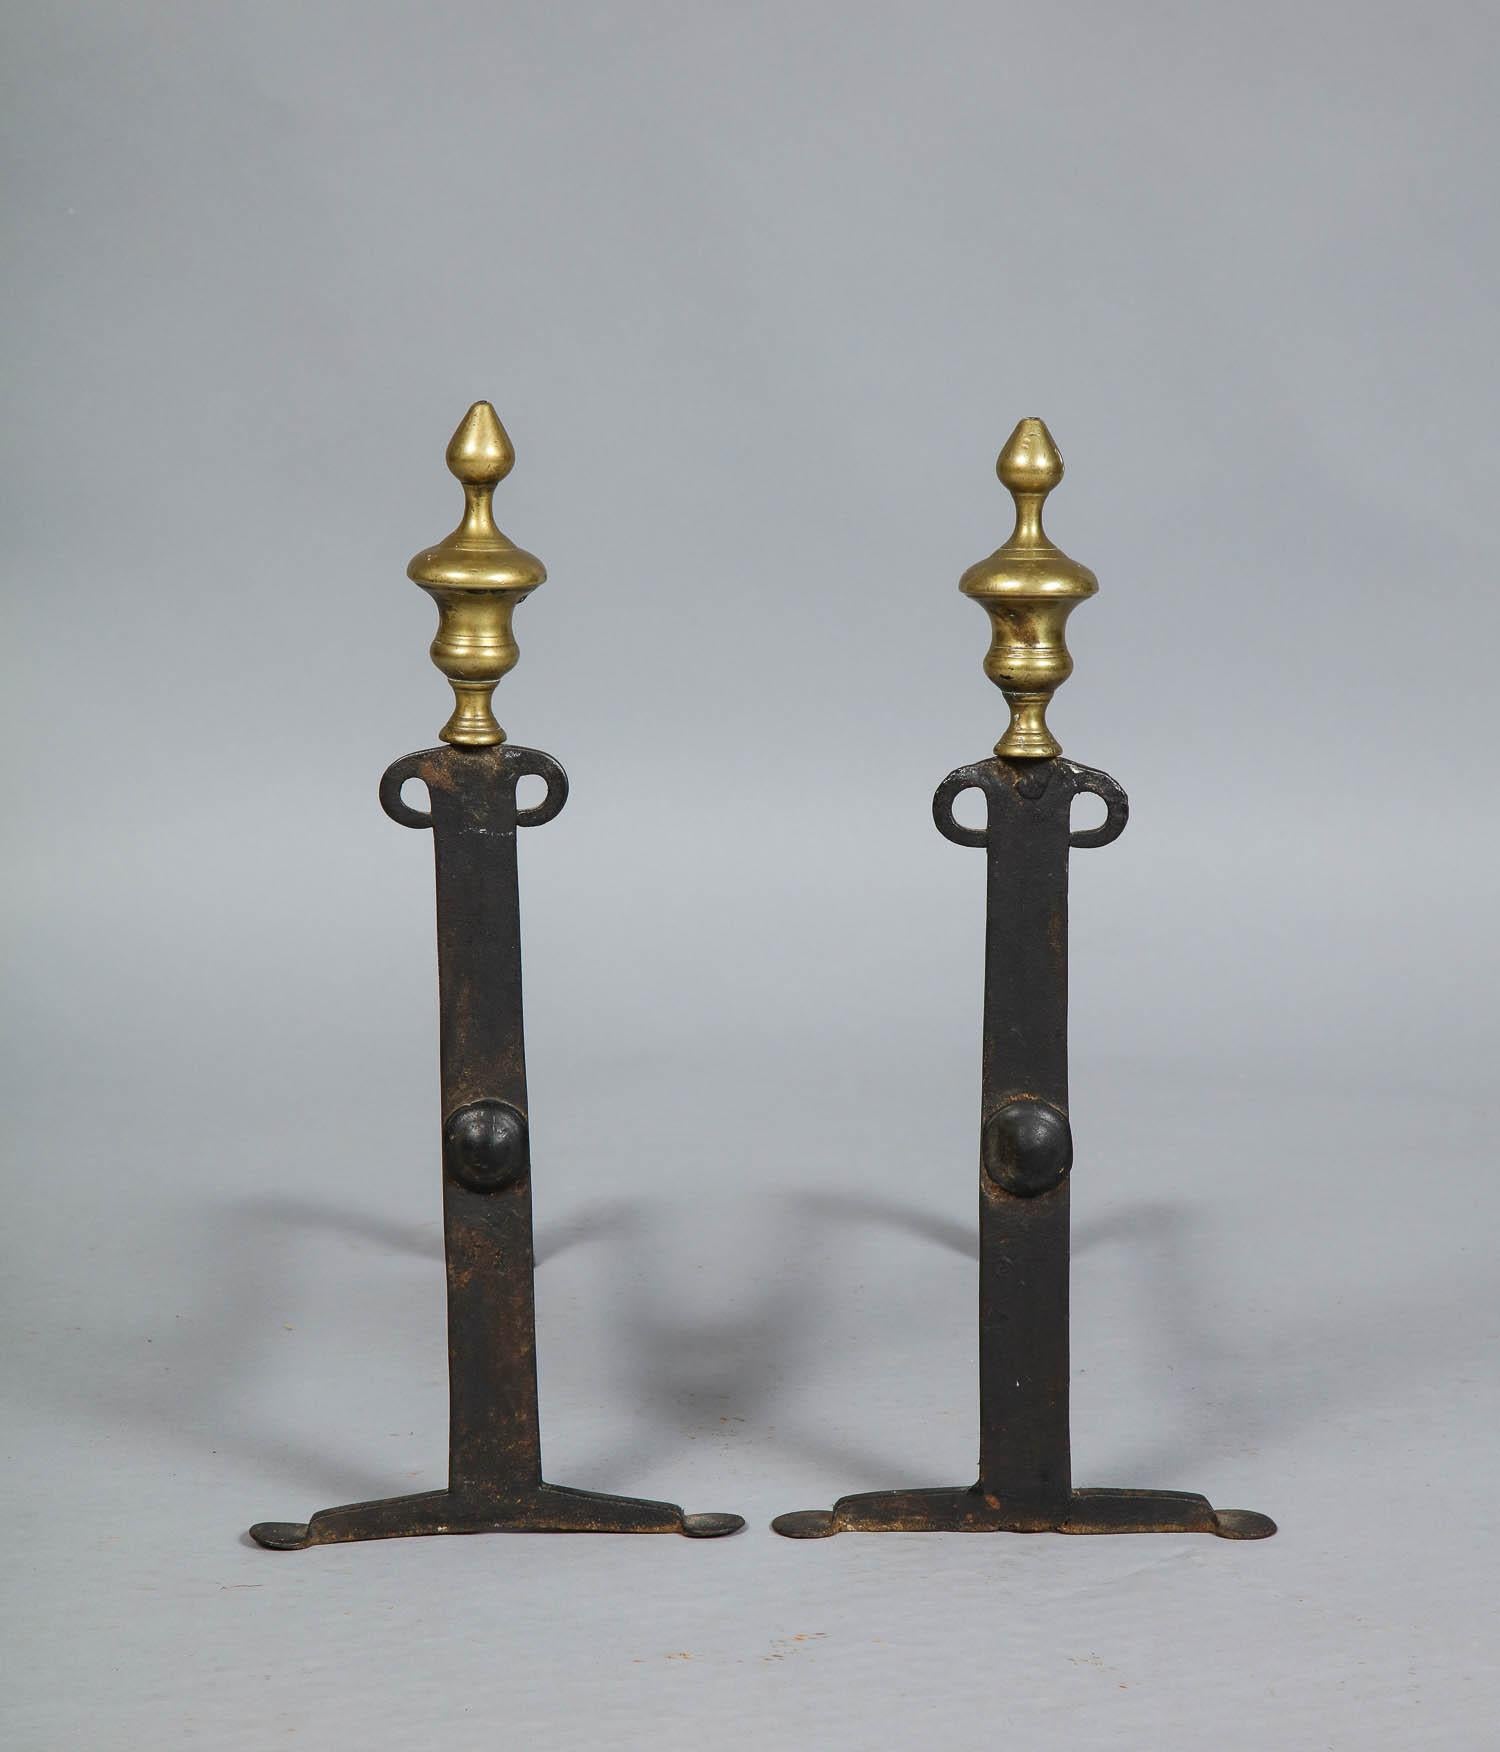 Fine pair of 18th century classical andirons having brass urn finials over flattened bar shafts with open Curule shoulders and standing on flattened penny feet, circa 1780. Possibly Rhode Island.